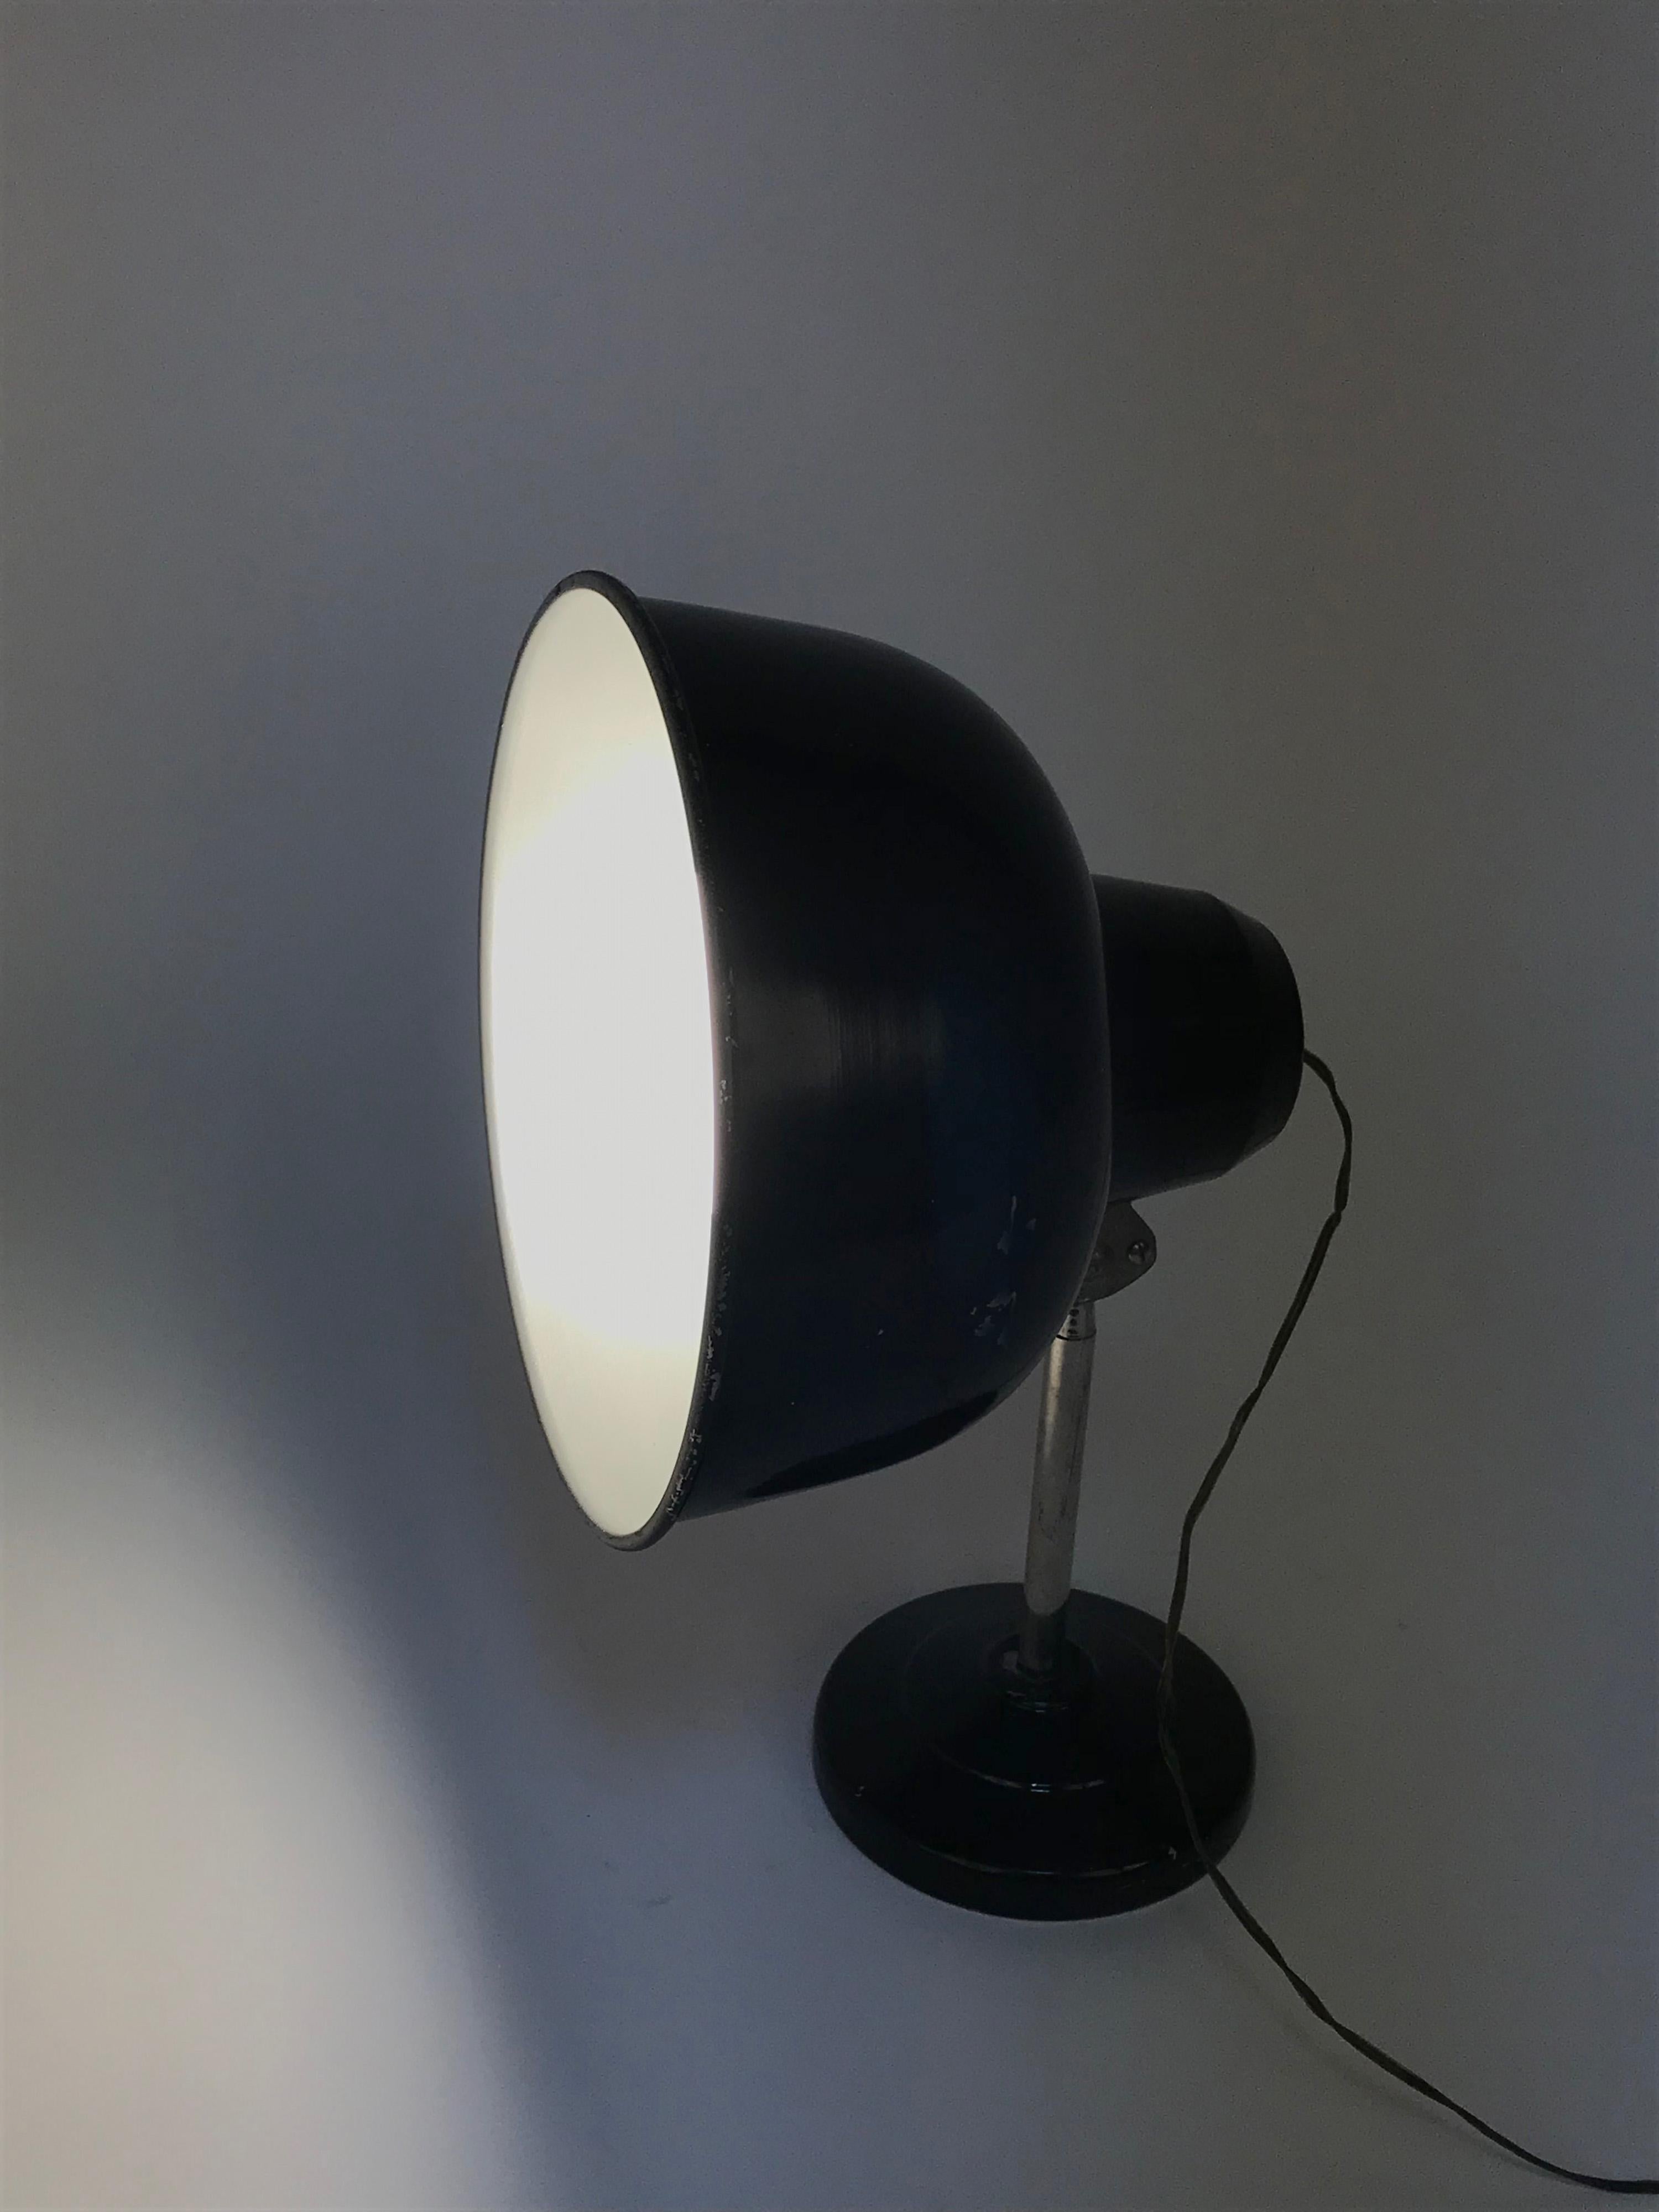 Amazing midcentury industrial black enamelled metal adjustable table desk lamp. This fantastic item was designed in Italy during the 1940s.

This marvellous lamp has its original bulb from the 1940s at 125 volts. Works with 250-volt bulbs, but